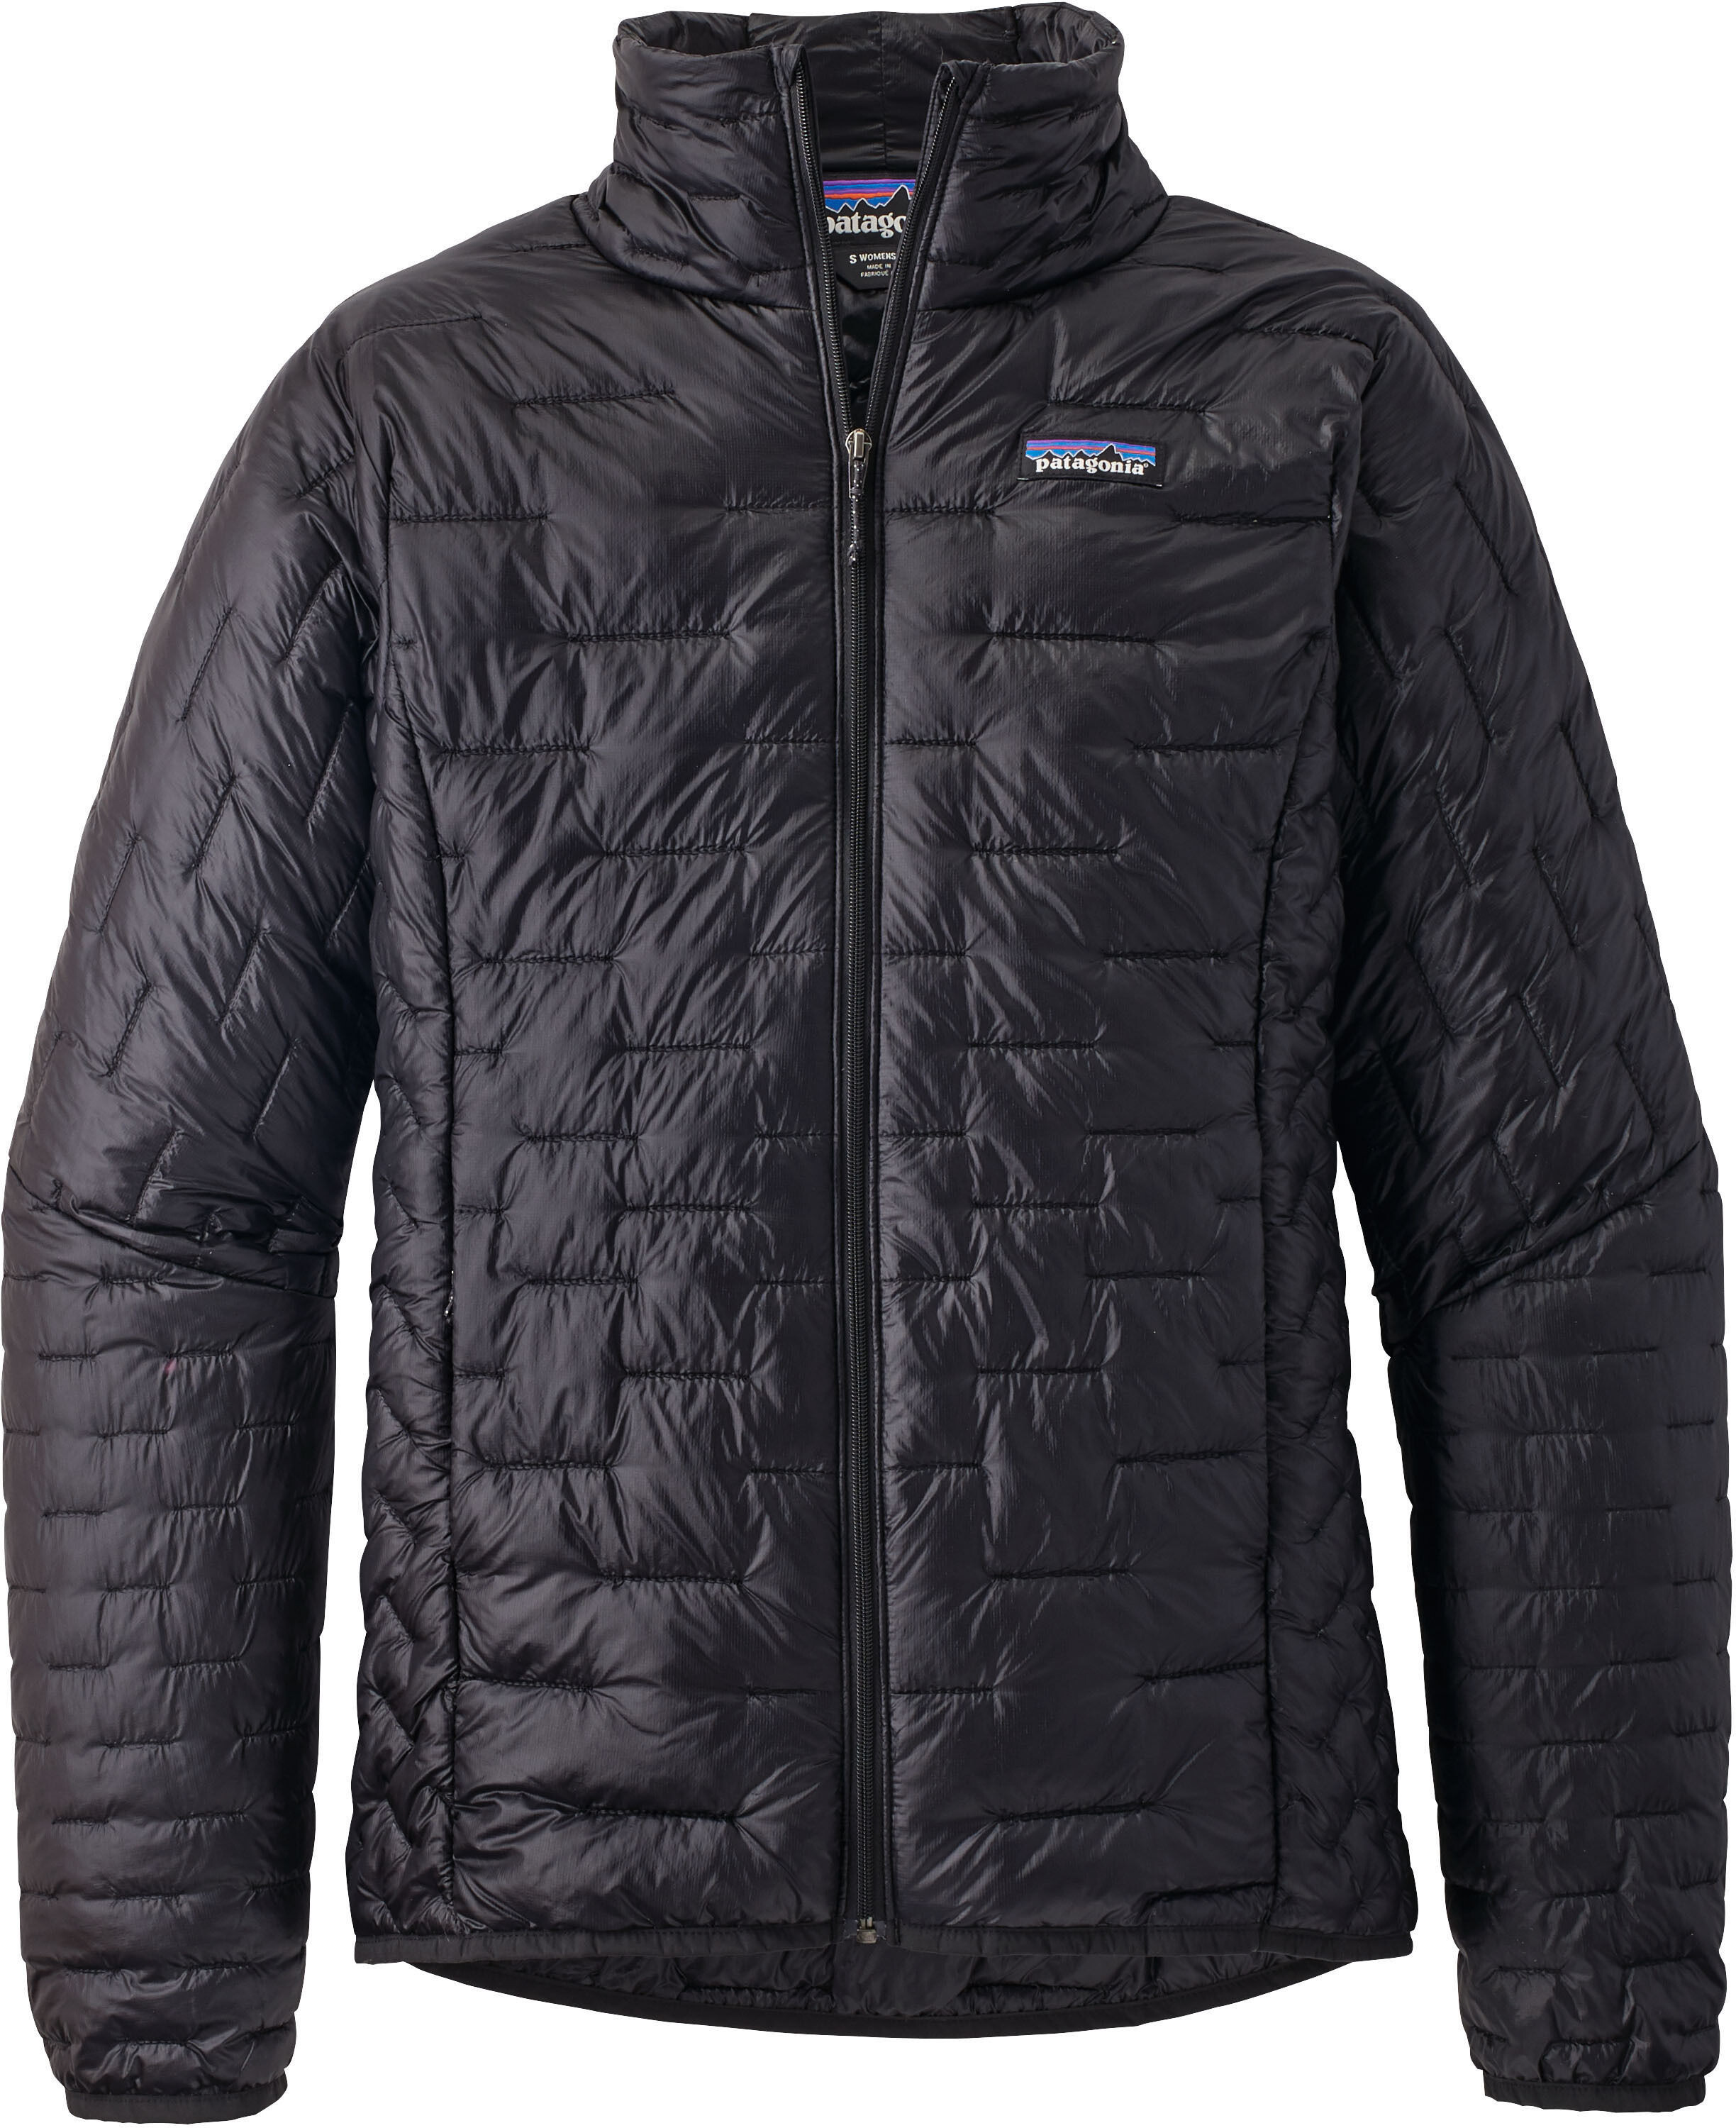 The Ultimate Guide to Choosing the Best Patagonia Micro Puff Jacket